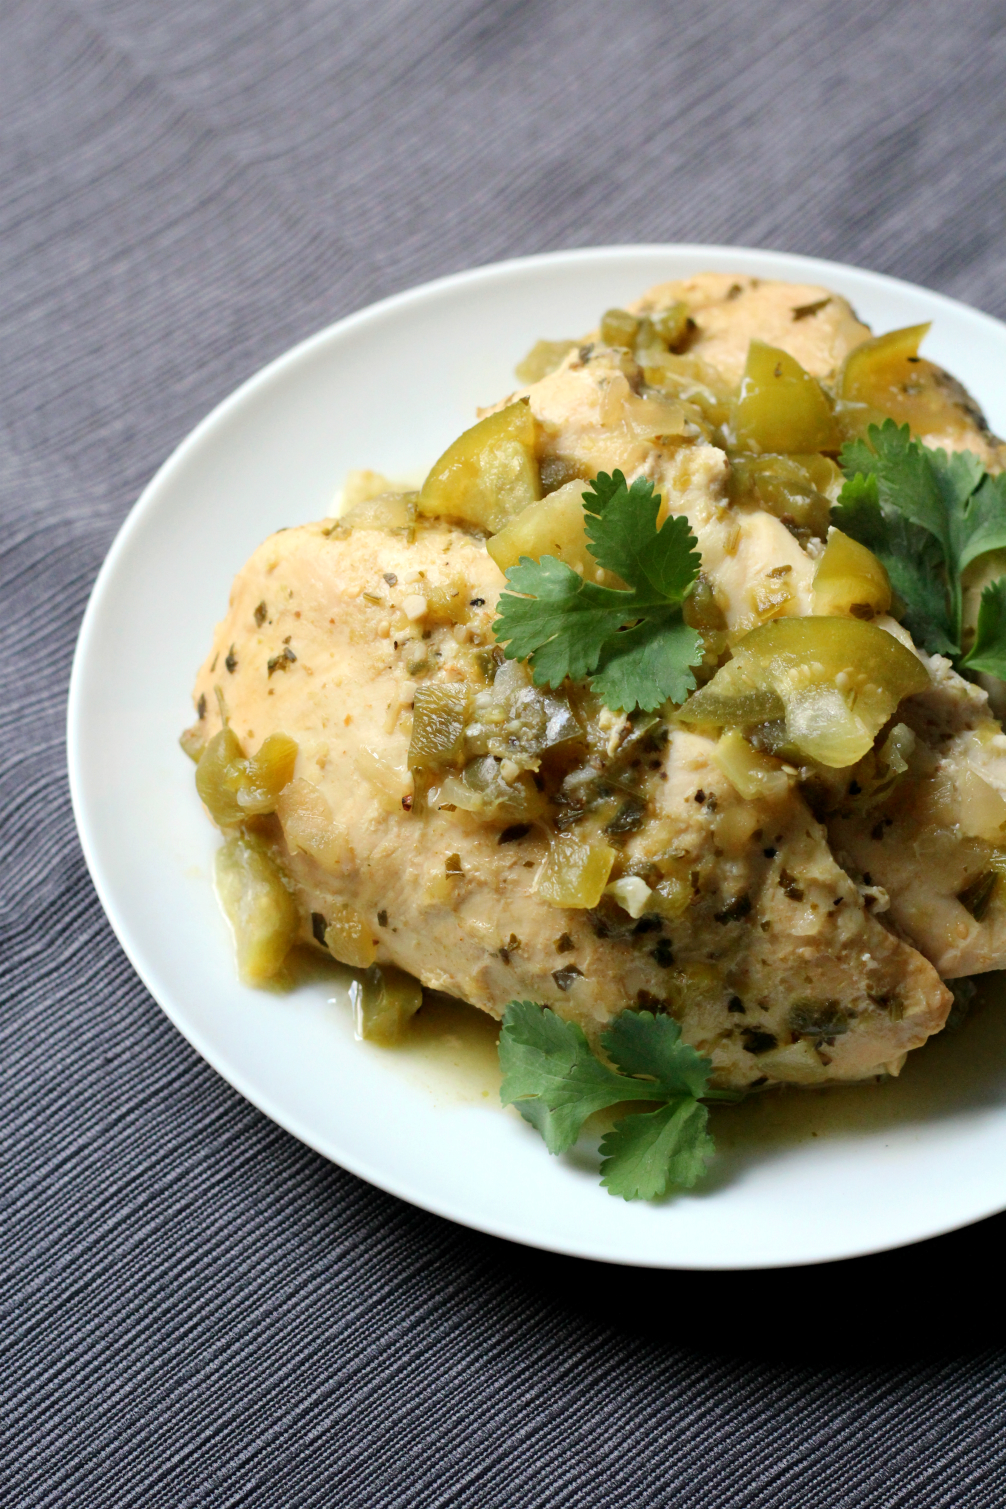 Slow Cooker Salsa Verde Chicken | Strength and Sunshine @RebeccaGF666 The classic green sauce, salsa verde with tomatillos, is the perfect addition to a simple slow cooker salsa verde chicken recipe for any easy and healthy weeknight dinner. Gluten-free, paleo, and full of flavor!